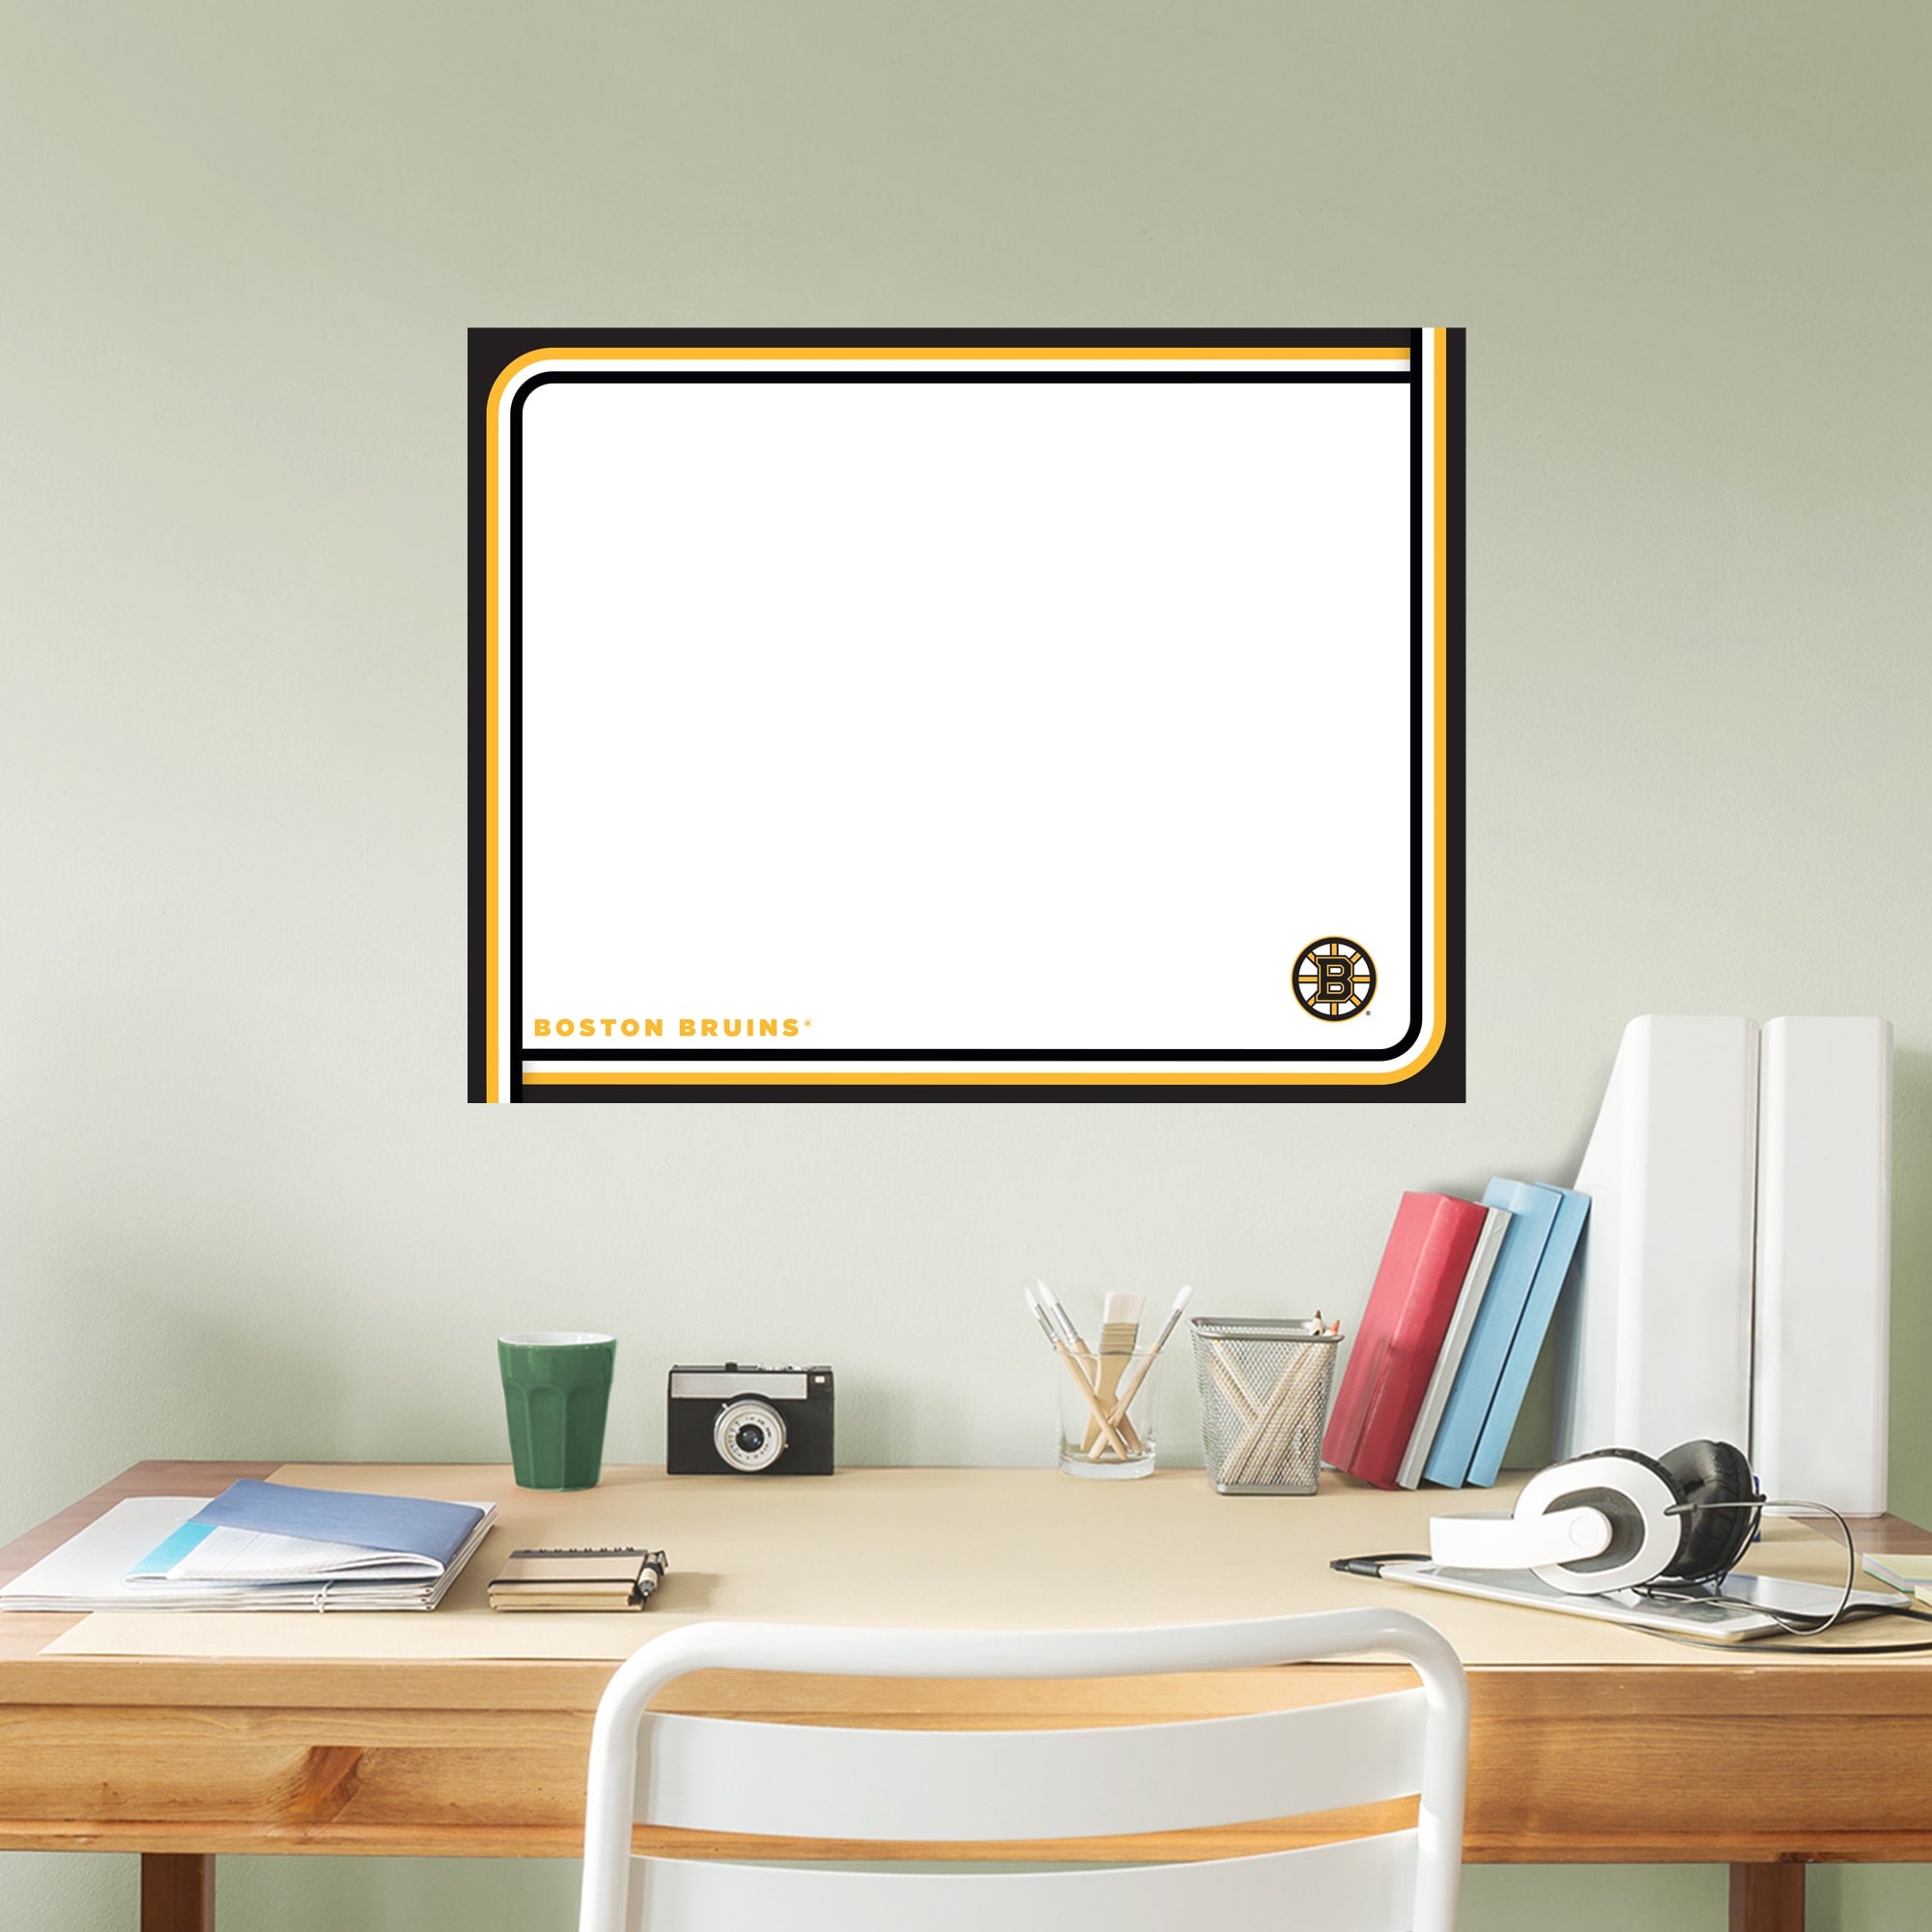 Boston Bruins: Dry Erase Whiteboard - X-Large Officially Licensed NHL Removable Wall Decal XL by Fathead | Vinyl